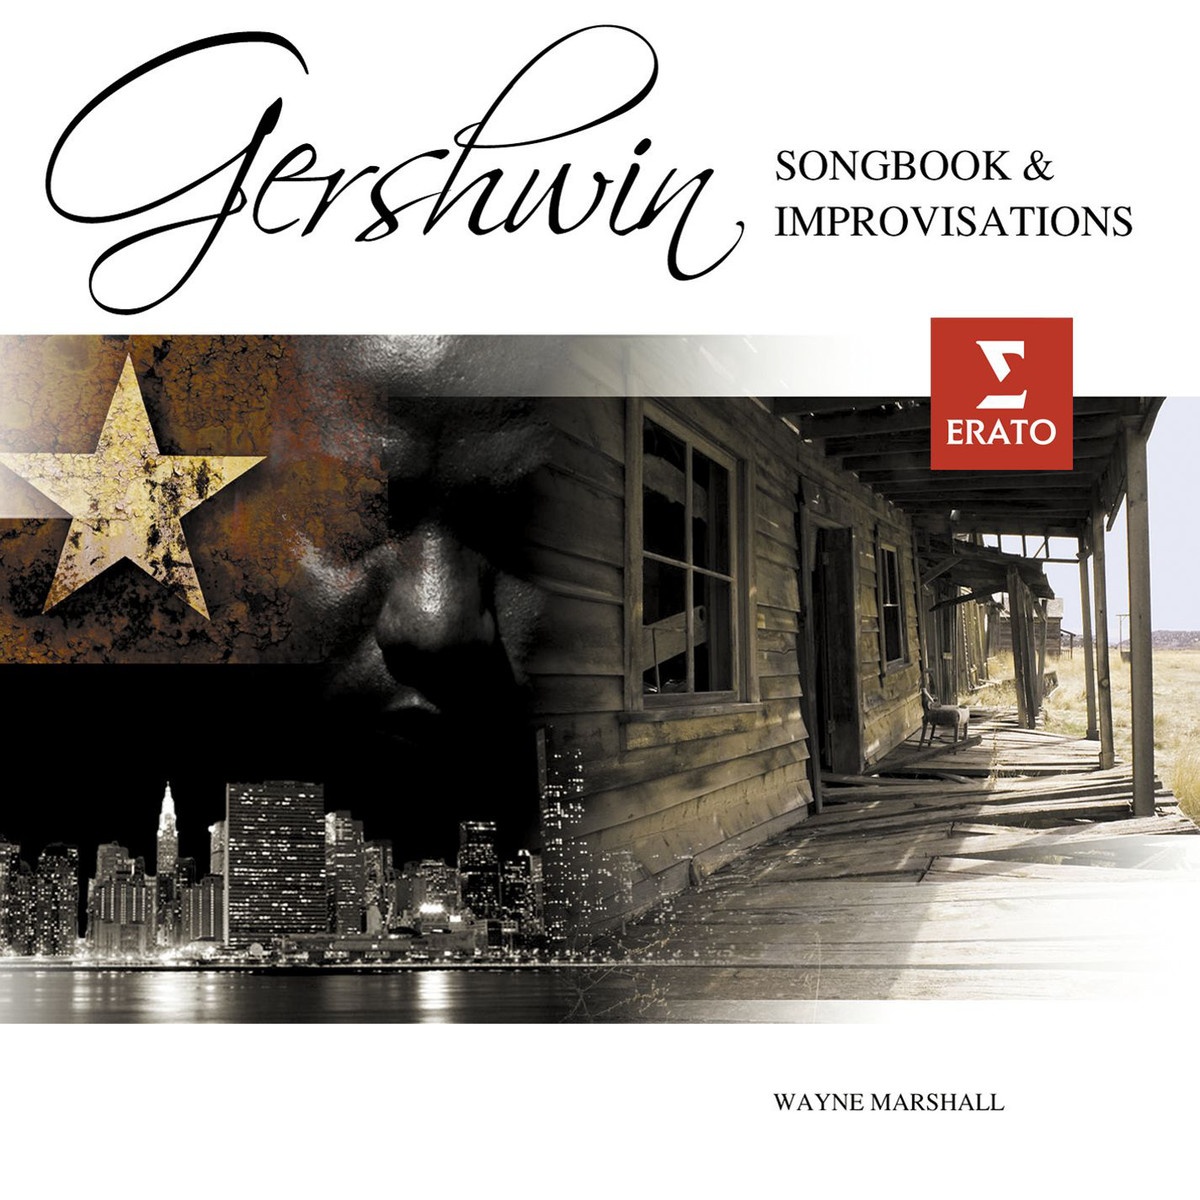 A Gershwin Songbook: improvisations on songs by George Gershwin: Summertime (Porgy & Bess)